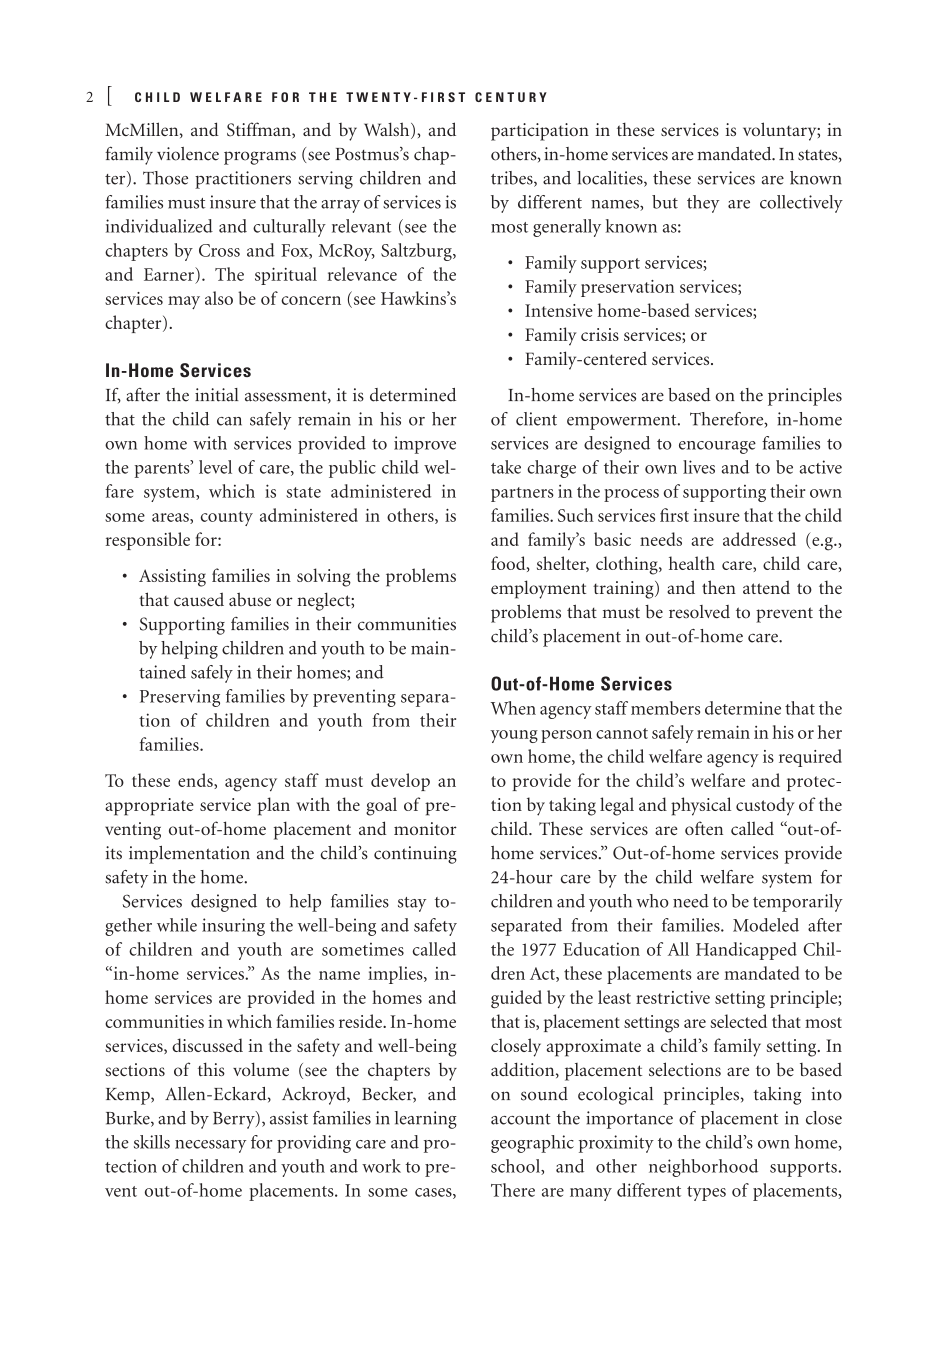 Child Welfare for the Twenty-first Century: A Handbook of Practices, Policies, and Programs page 2